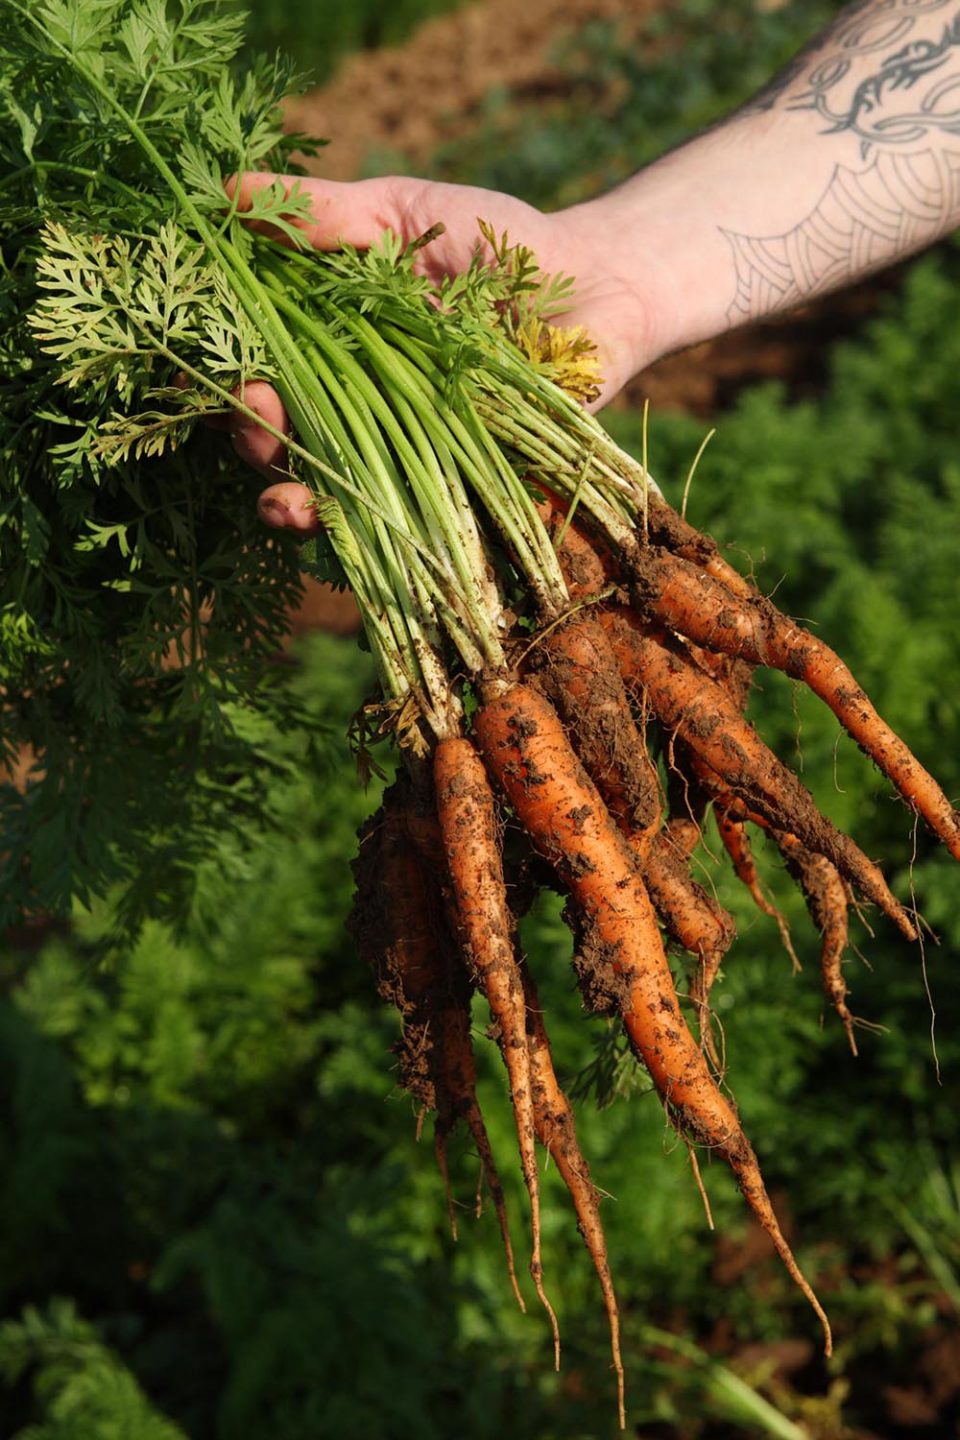 Carrots fresh out of the ground